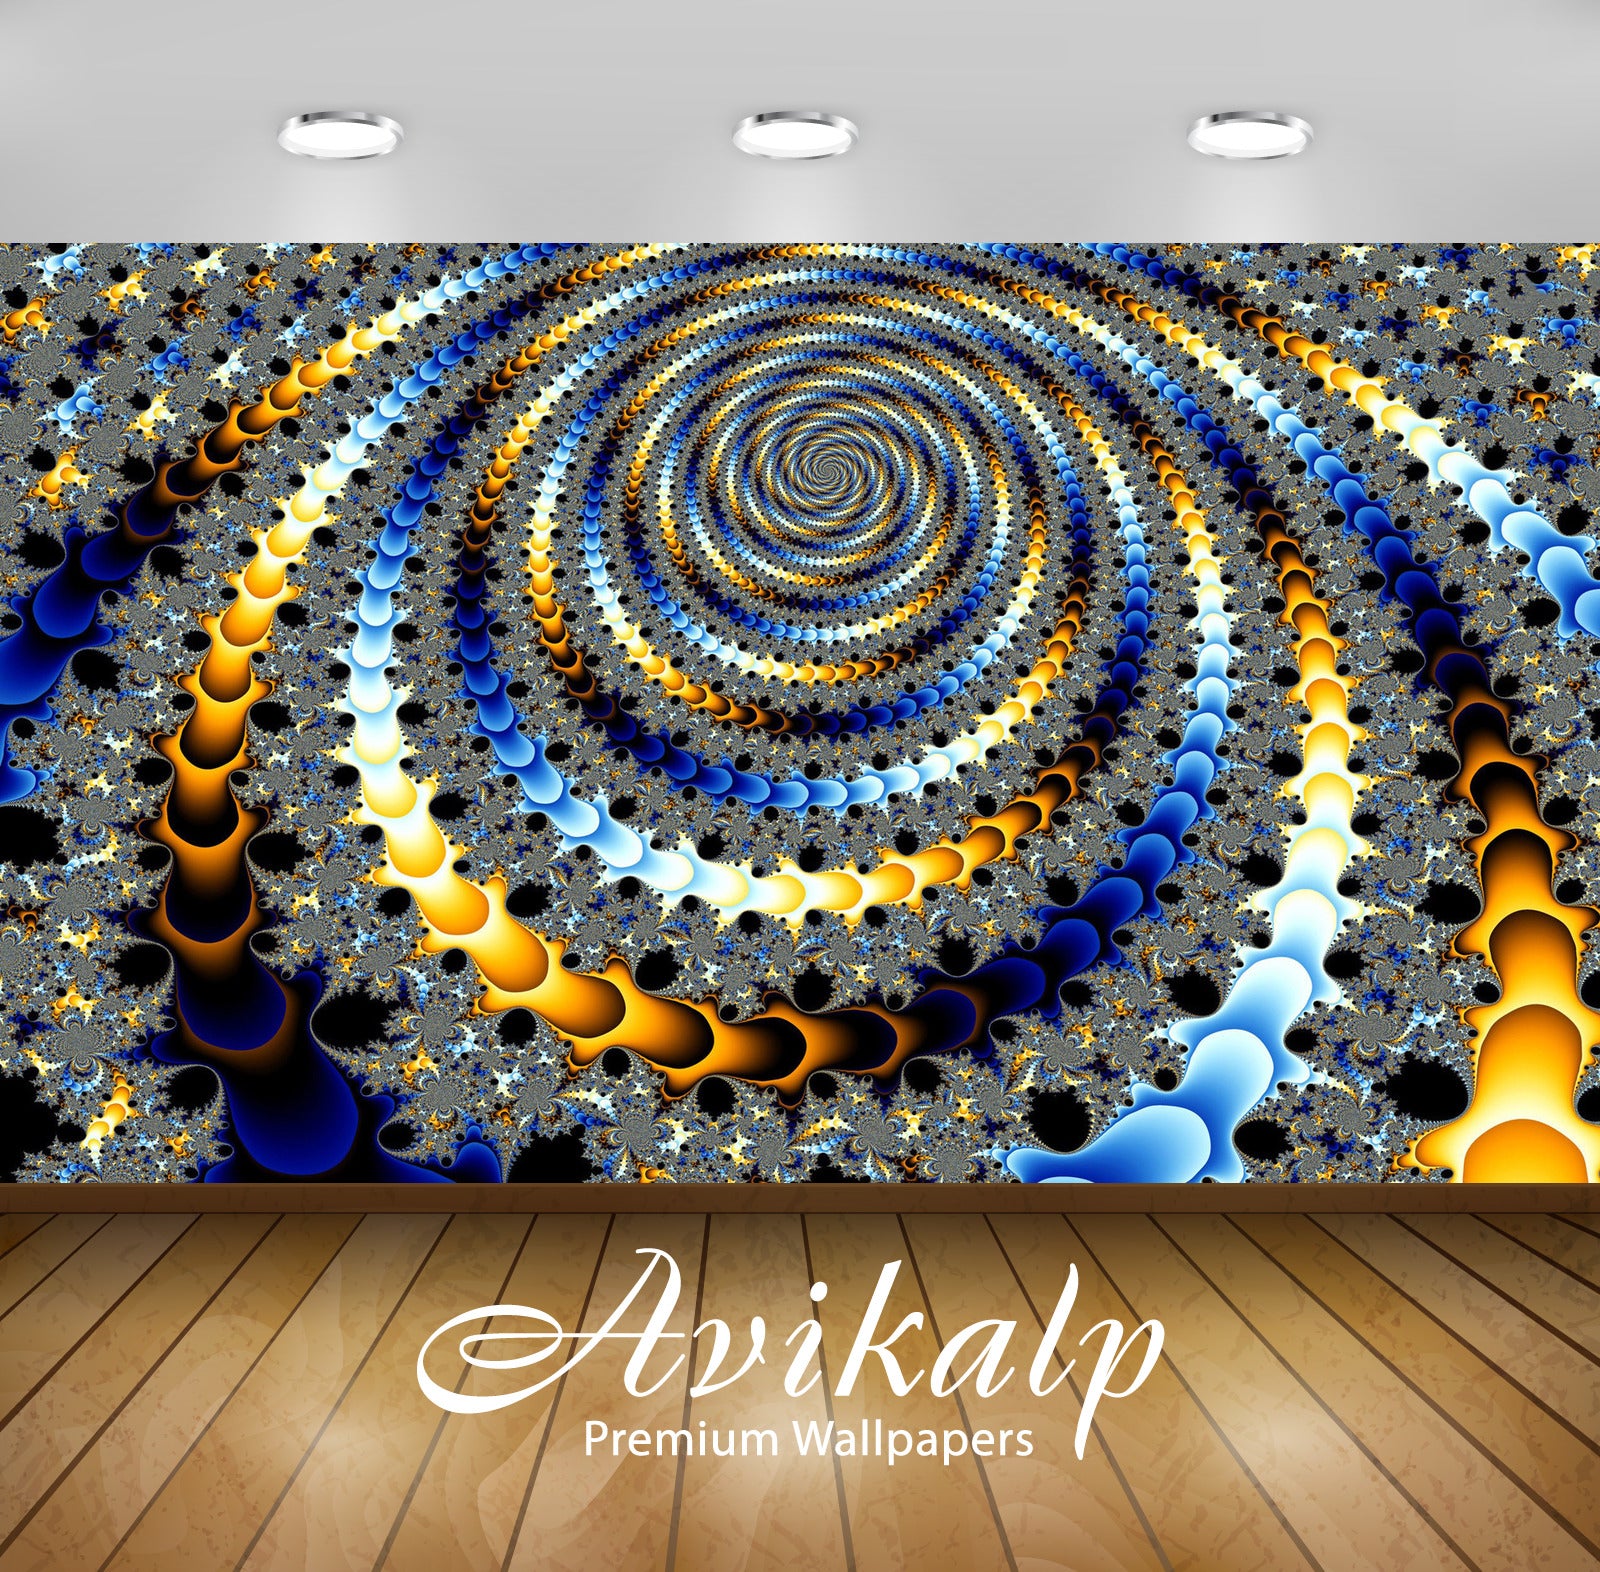 Avikalp Exclusive Awi4344 Fractal Blue And Golden Spiral Full HD Wallpapers for Living room, Hall, K